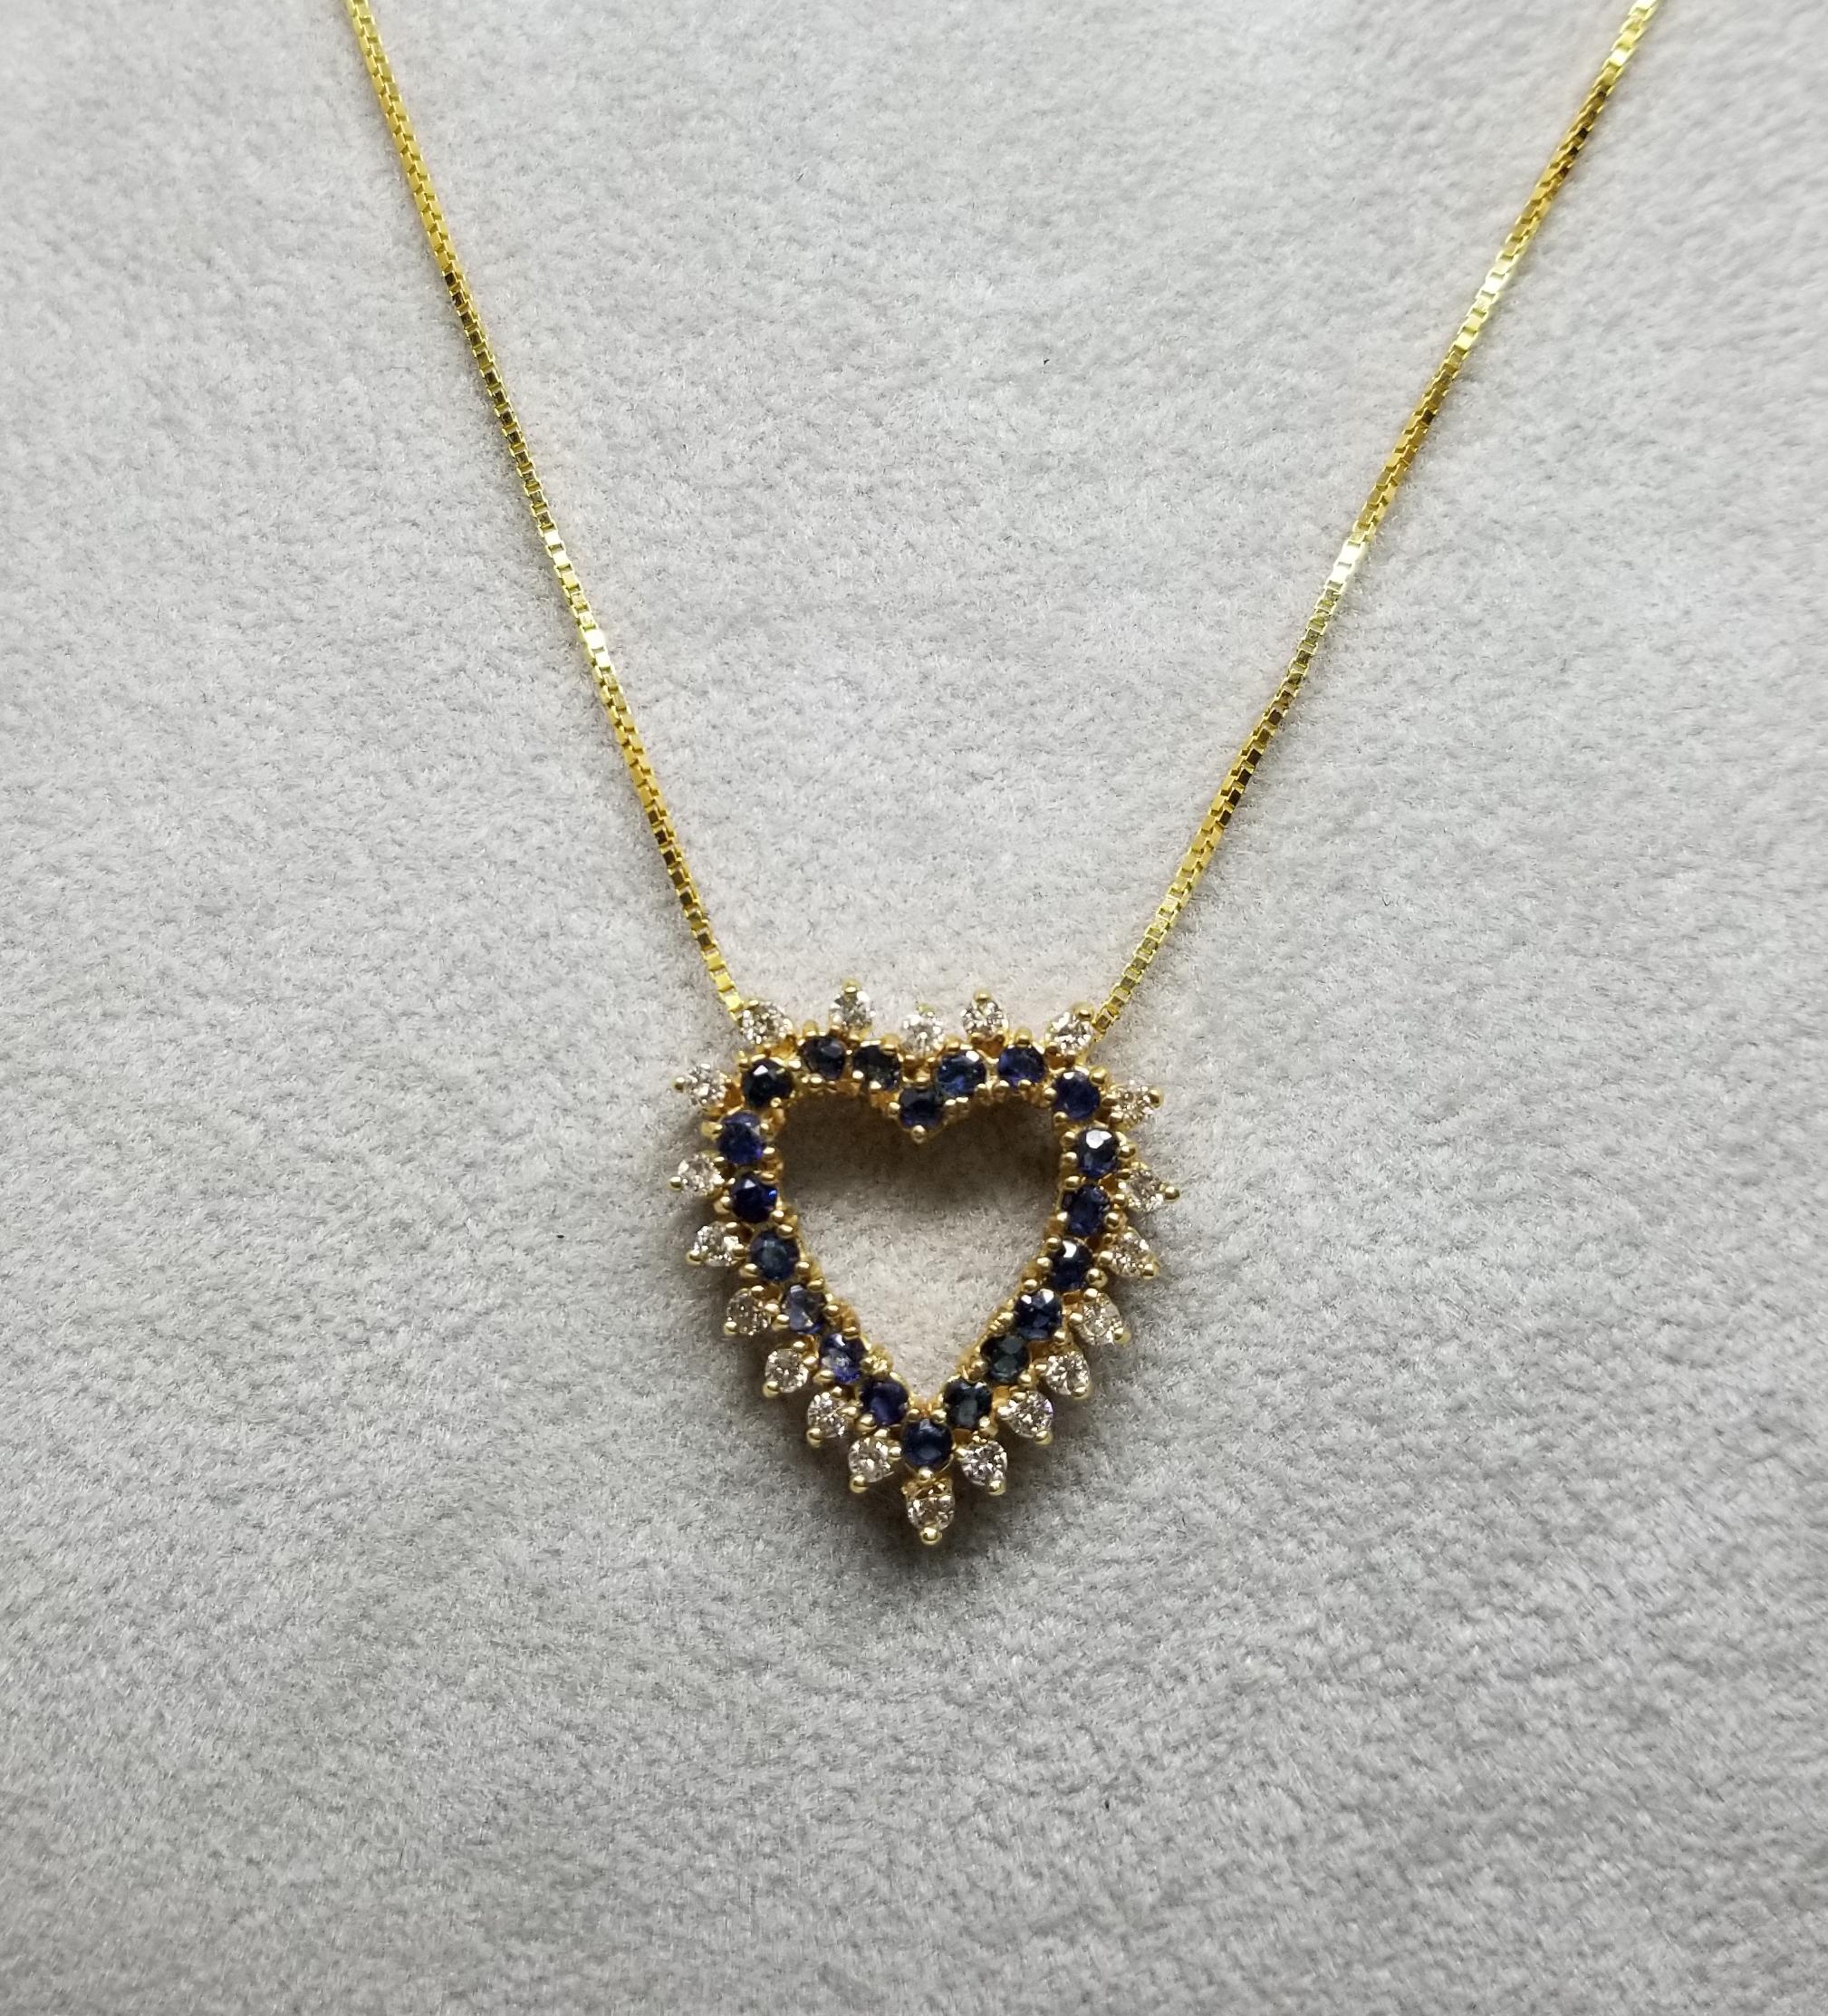 14k yellow gold diamond and sapphire heart containing 20 round full cut diamonds of very fine quality weighing .60pts. and 20 round sapphires weighing 1.10cts. on a 16k inch chain.